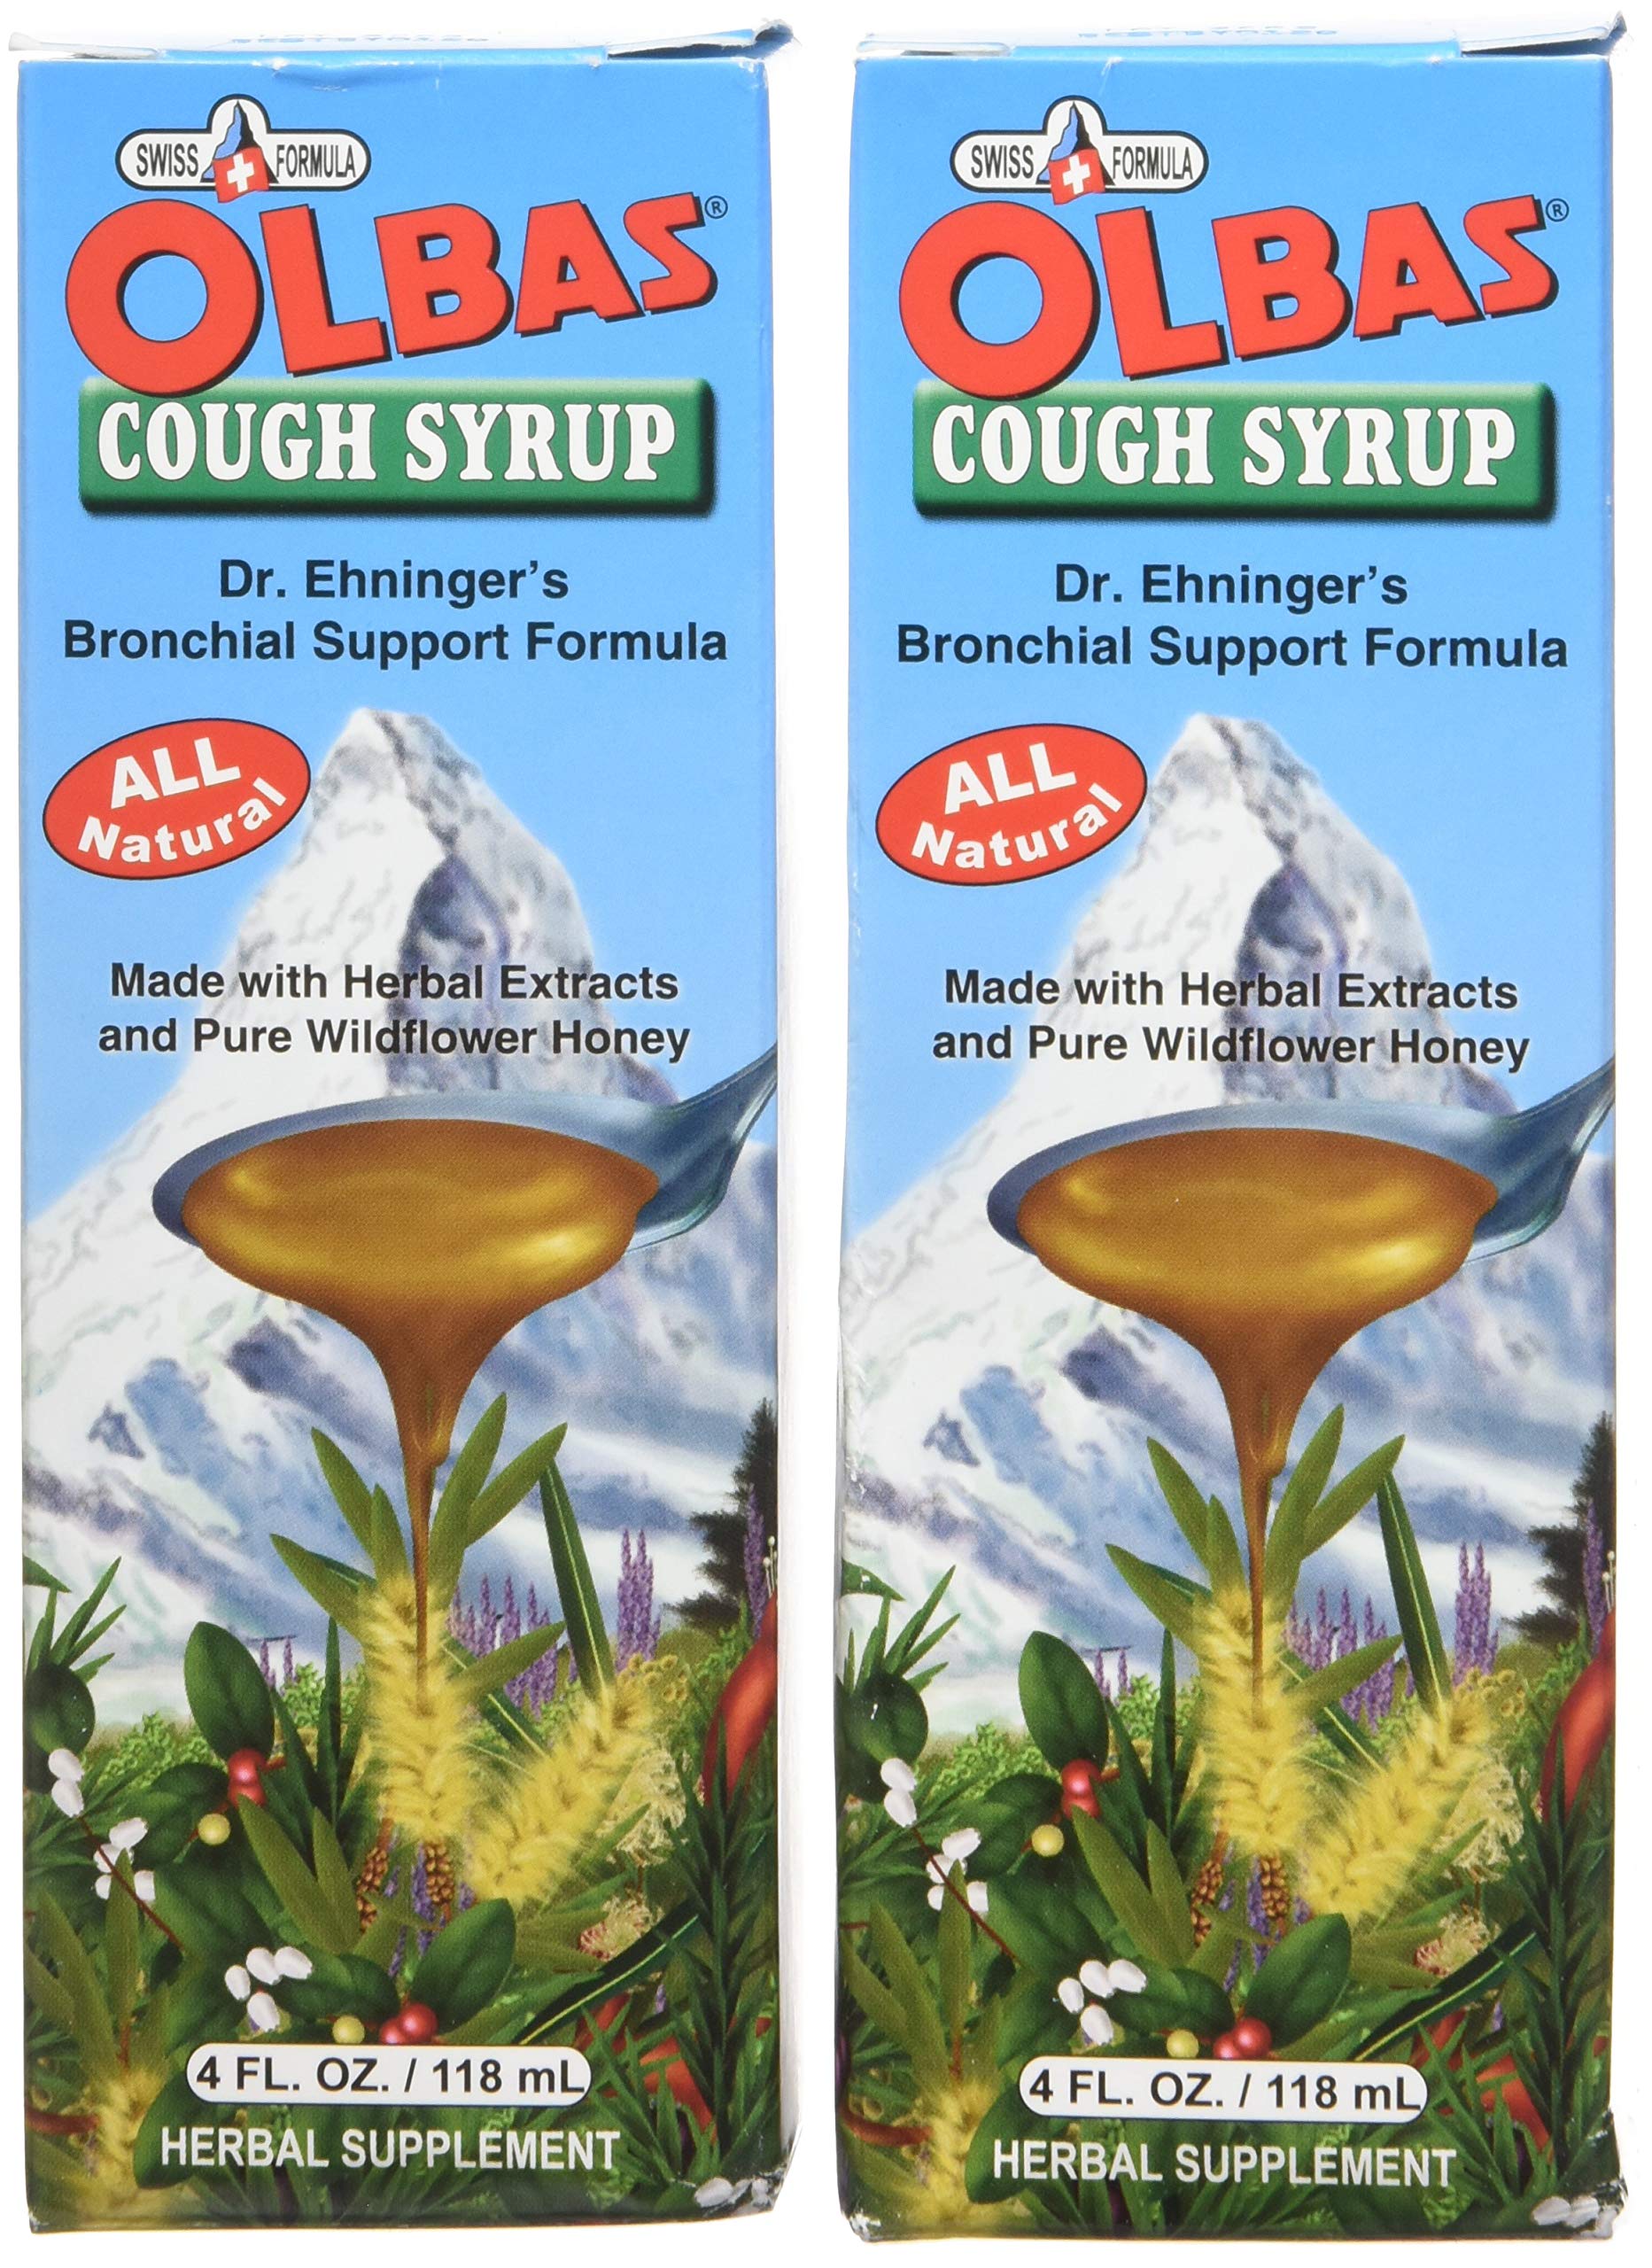 Olbas Syrup Cough Pack of 2 (4 FL. OZ.)